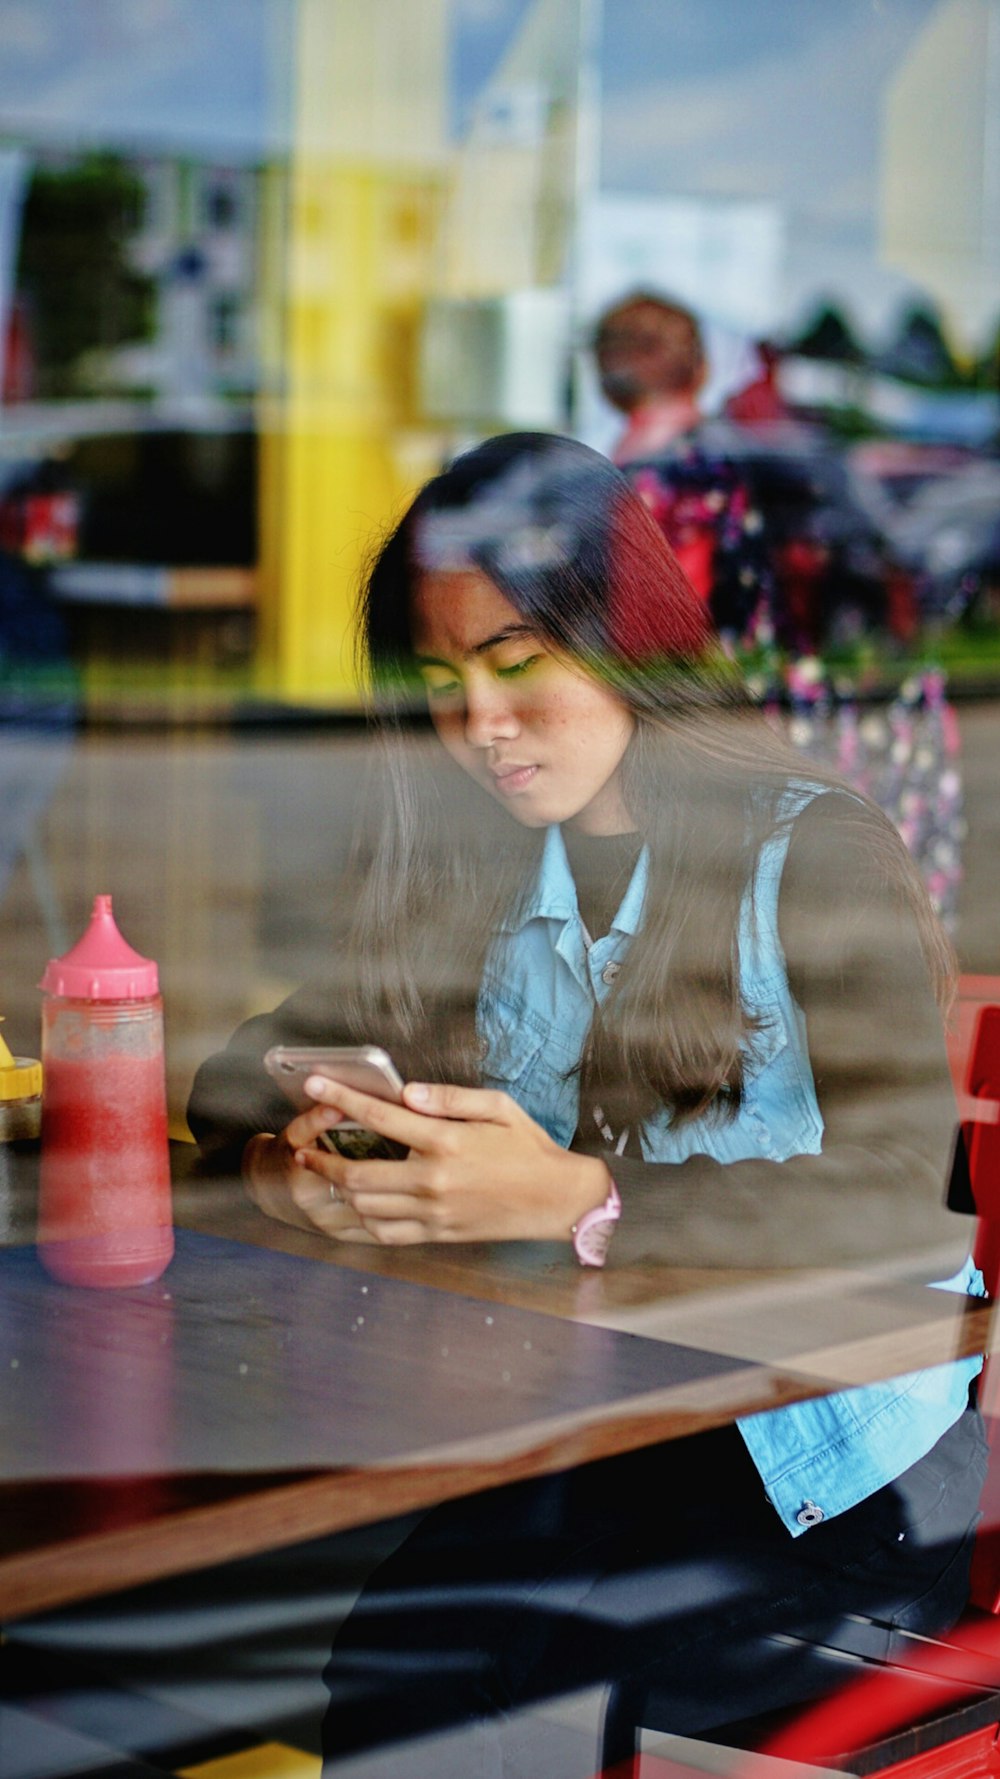 woman sitting on chair using smartphone